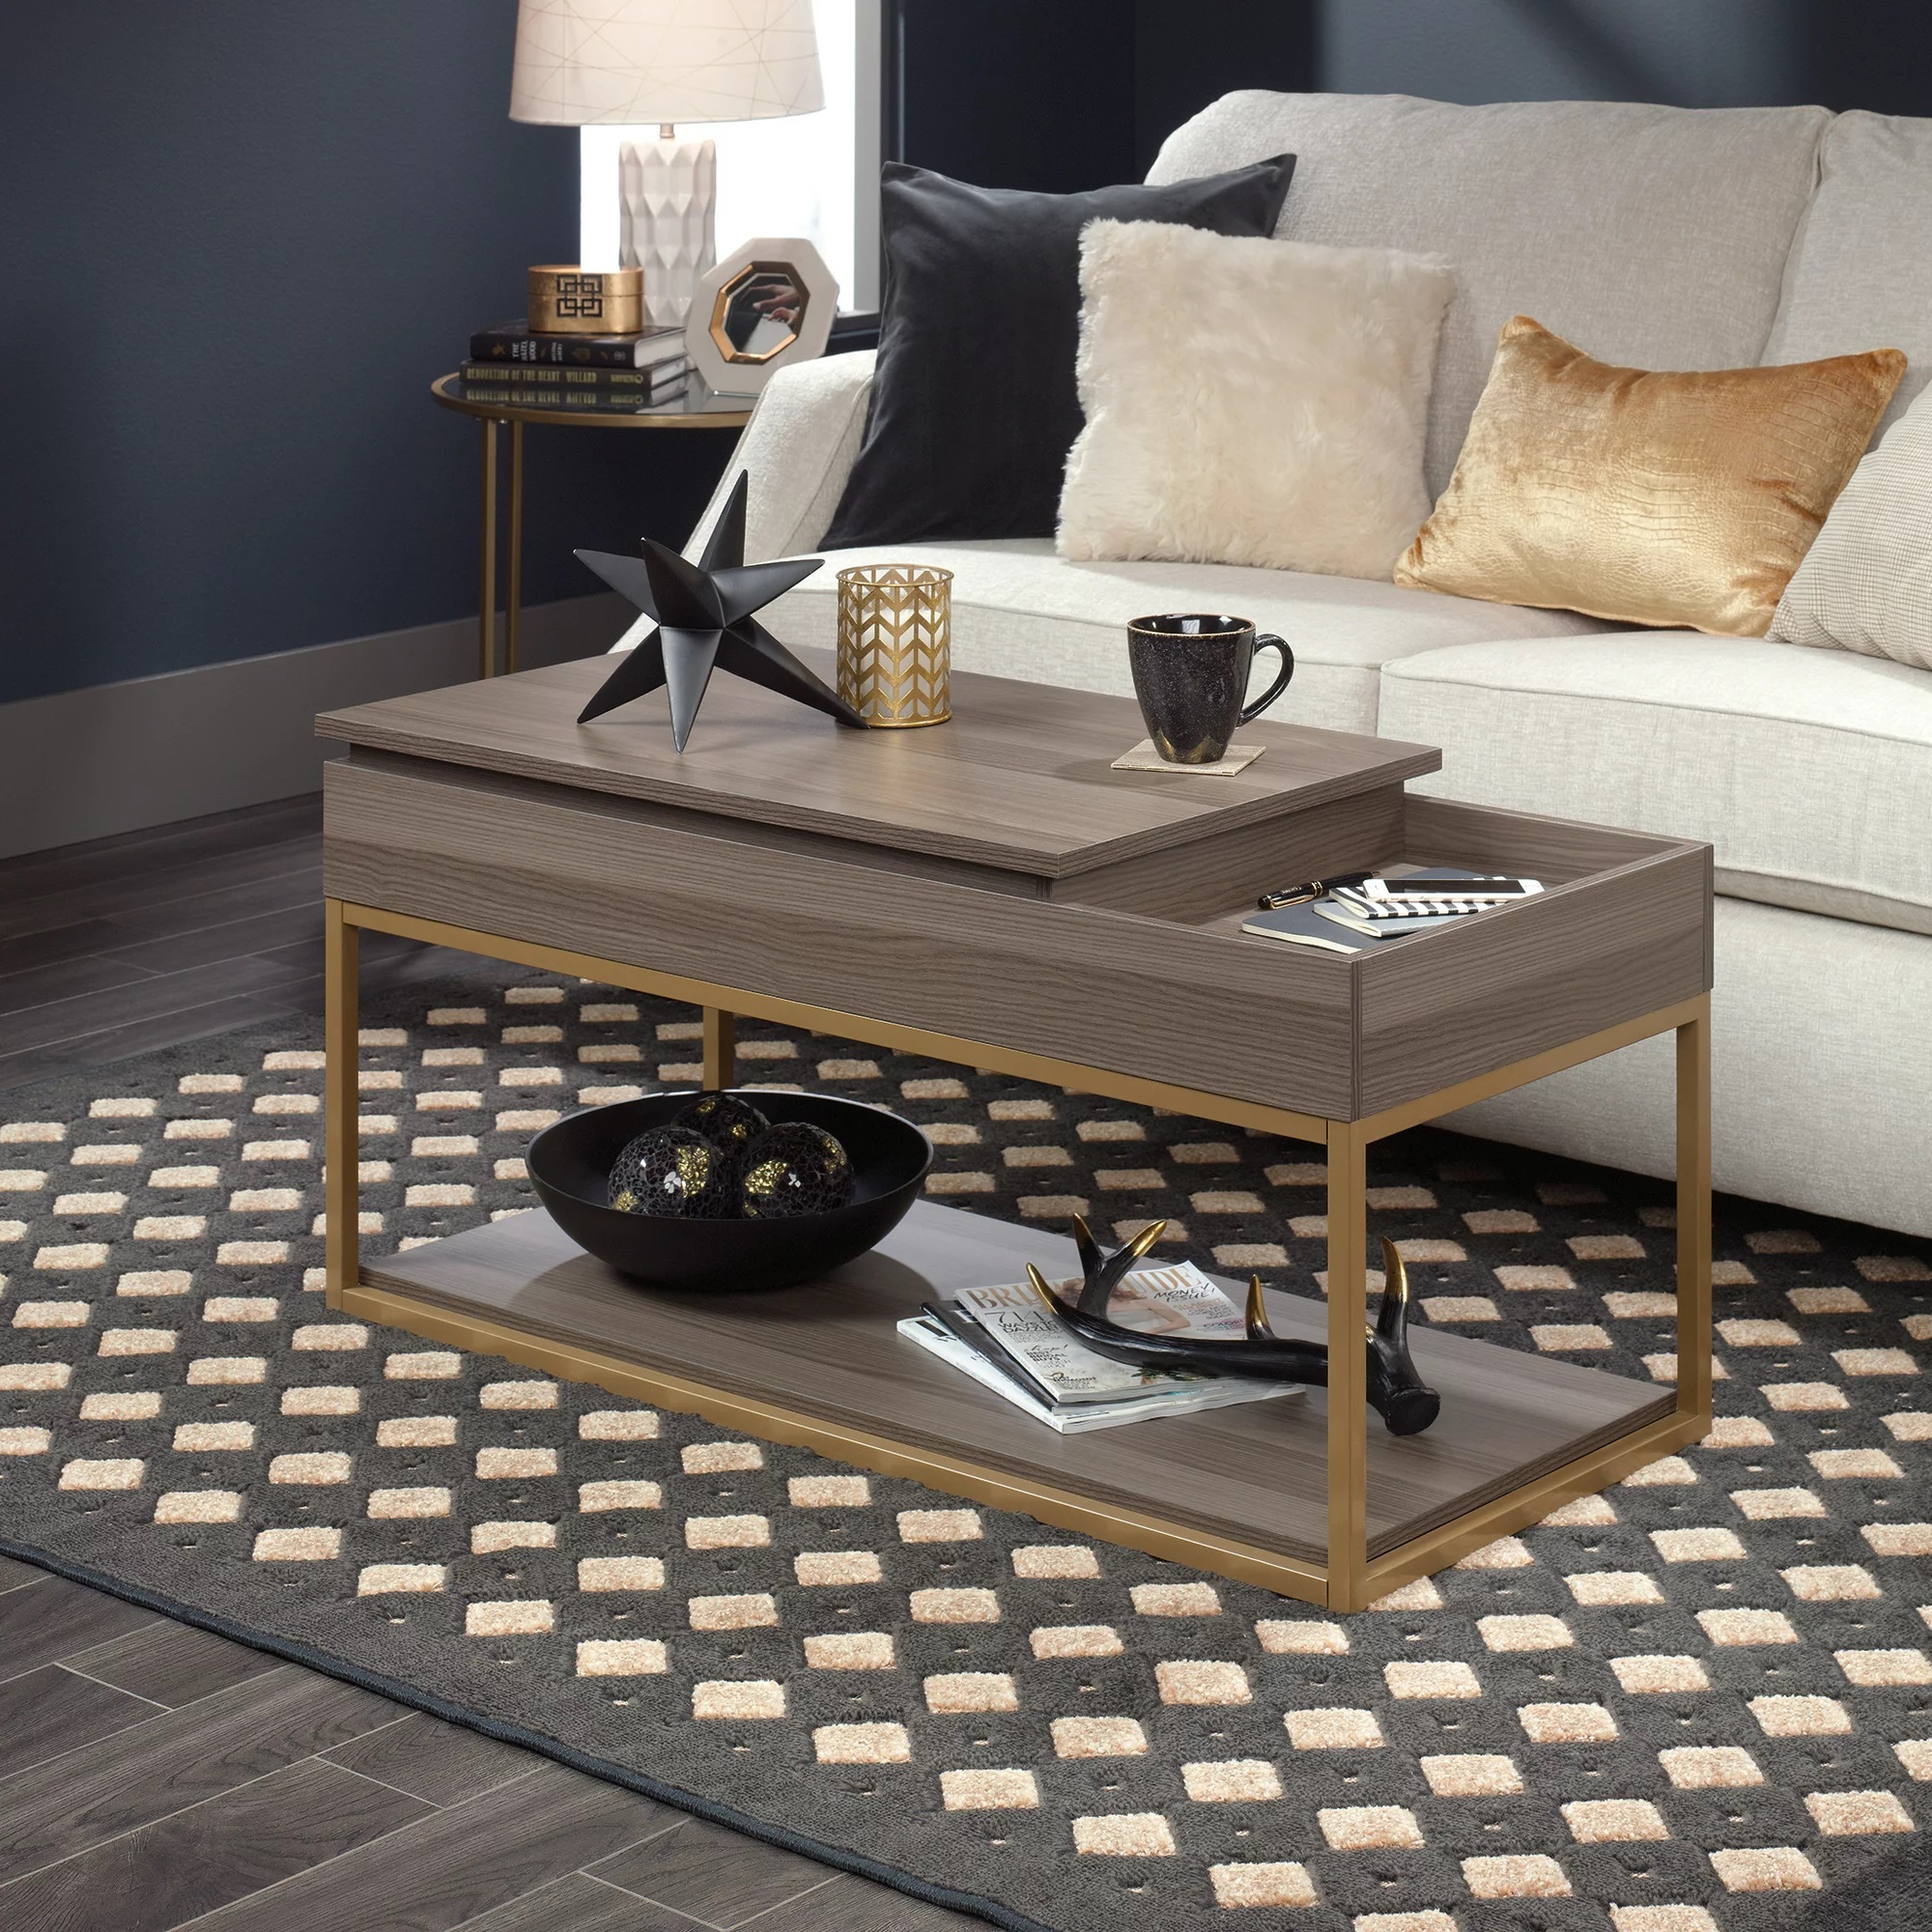 Better Homes and Gardens Nola Lift Coffee Table $84